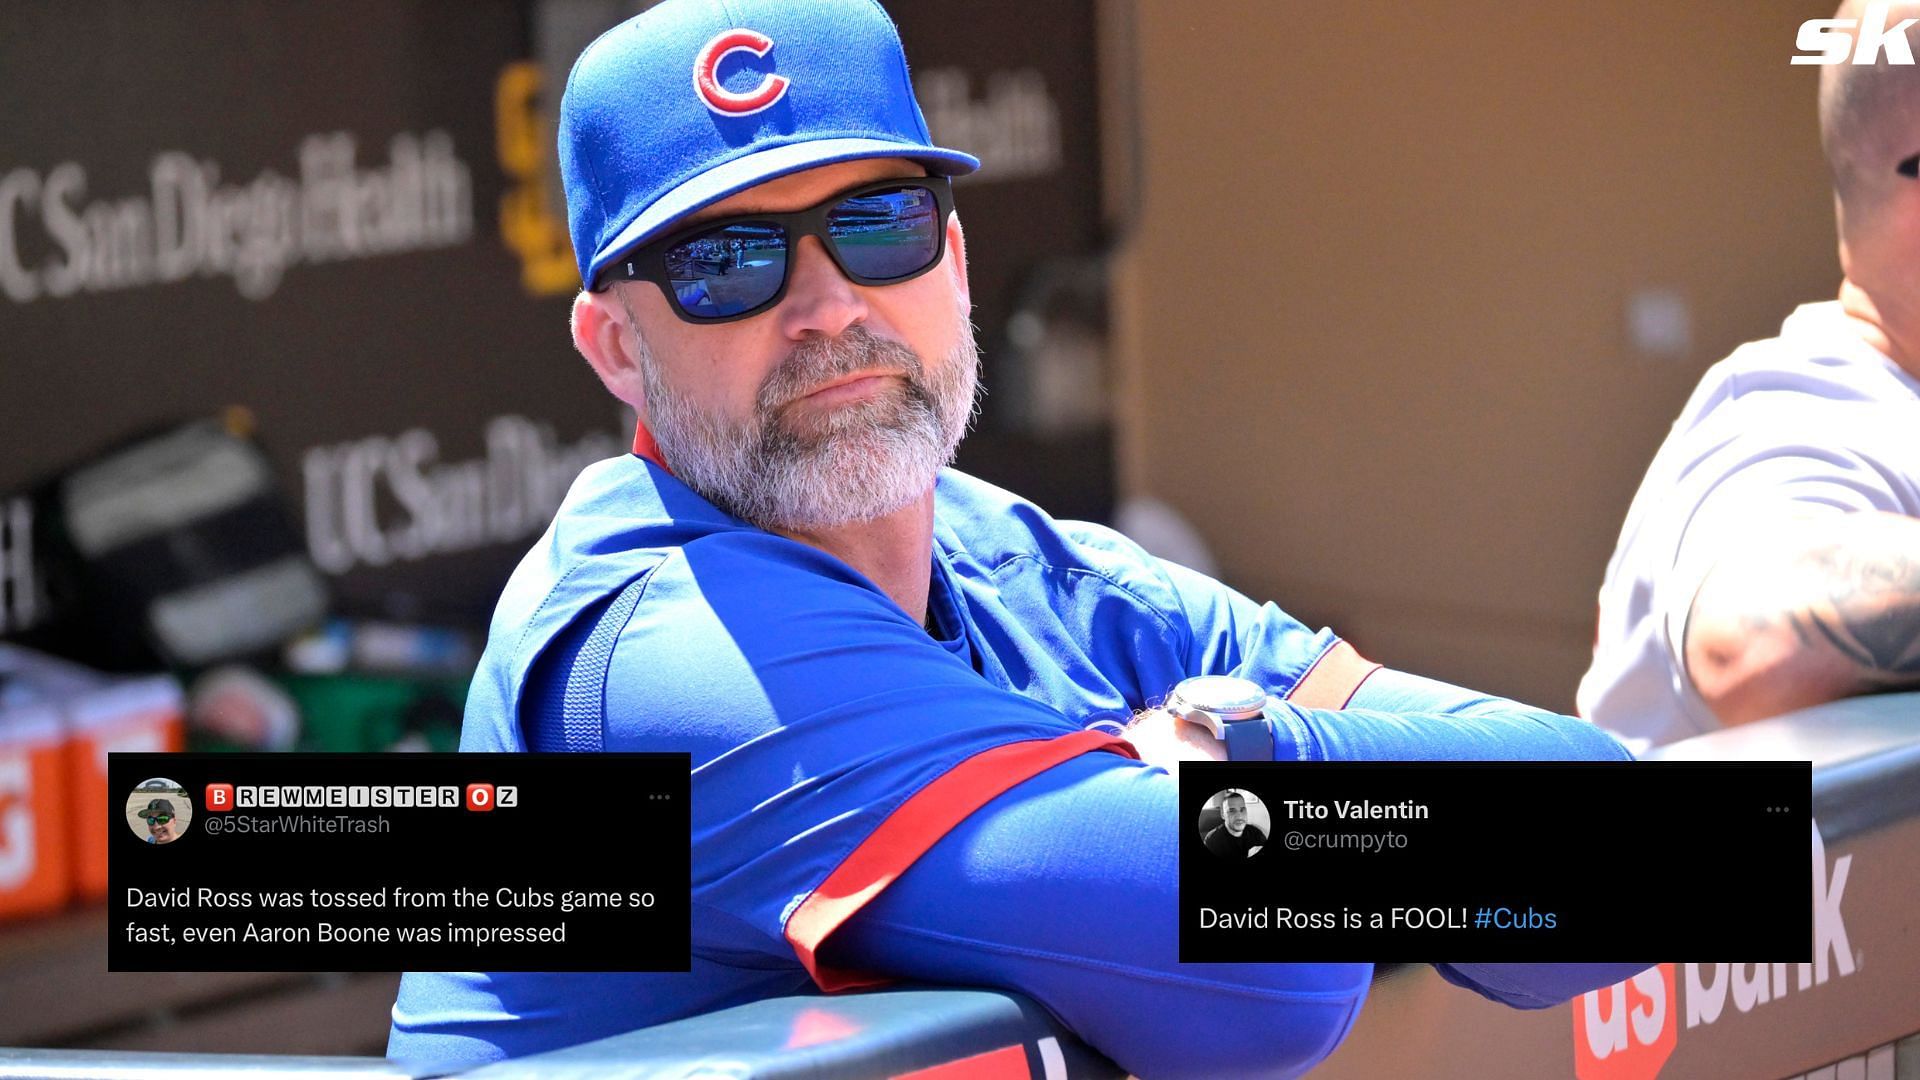 Chicago fans clown David Ross after manager was ejected early in game vs  Padres: Even Aaron Boone was impressed